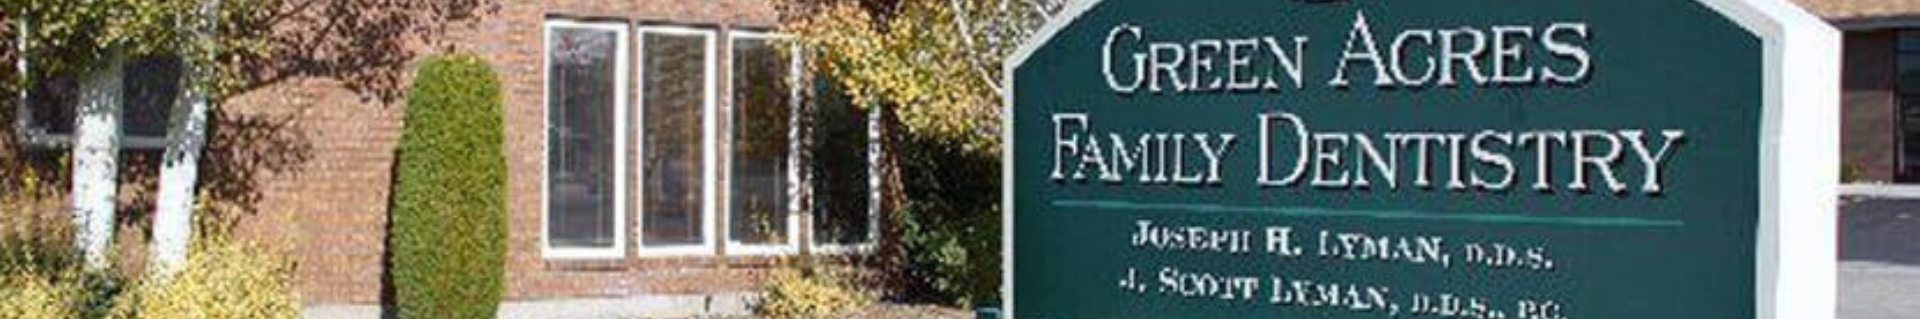 Green Acres Family Dentistry Twin Falls's profile banner